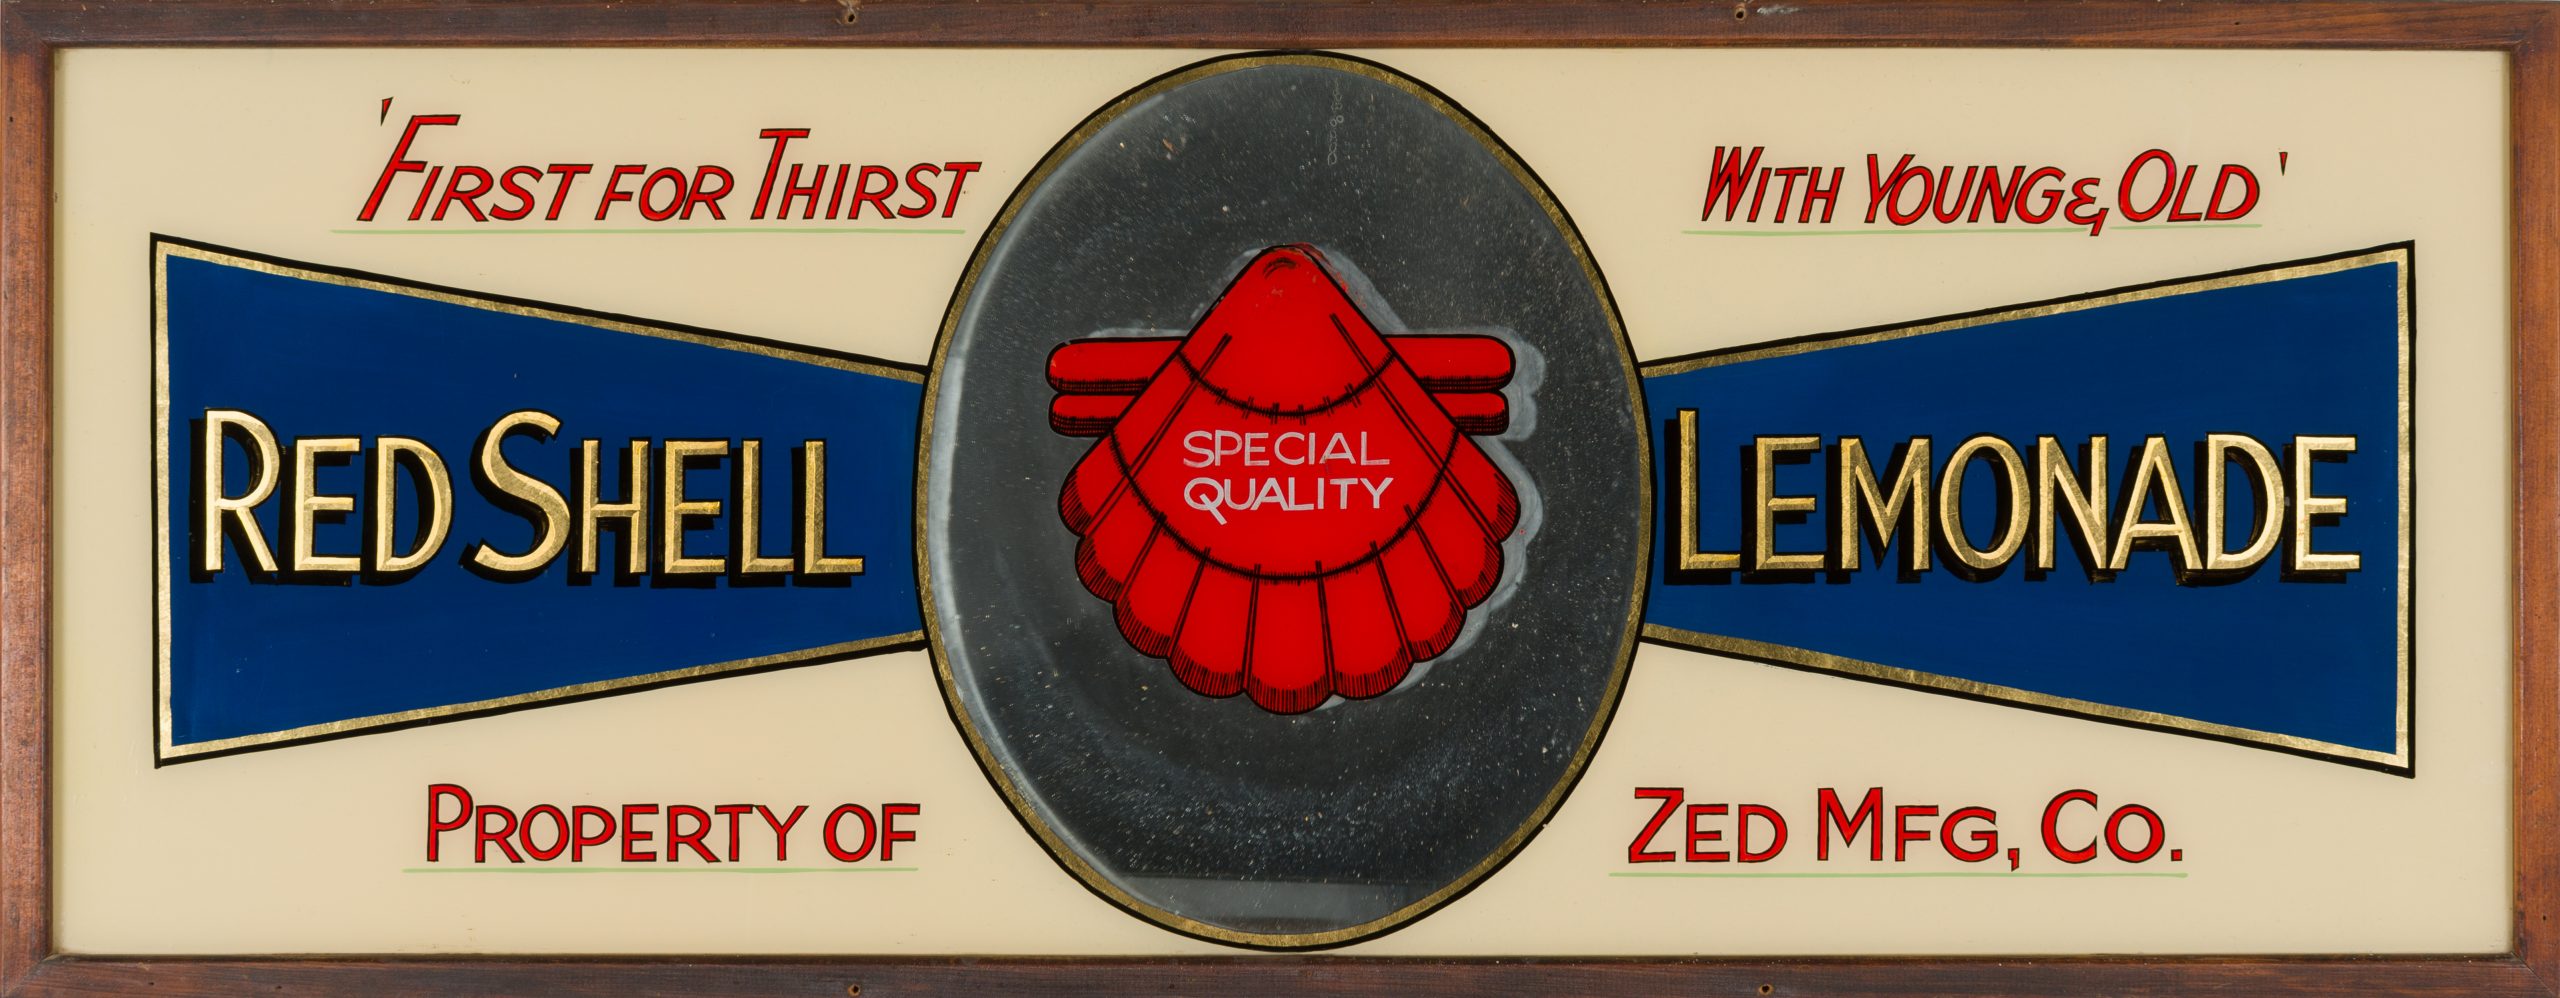 advertising mirror which has a red shell illustration at the centre, it reads 'FIRST FOR THIRST WITH YOUNG AND OLD / RED SHELL LEMONADE / PROPERTY OF ZED MFG, CO.'